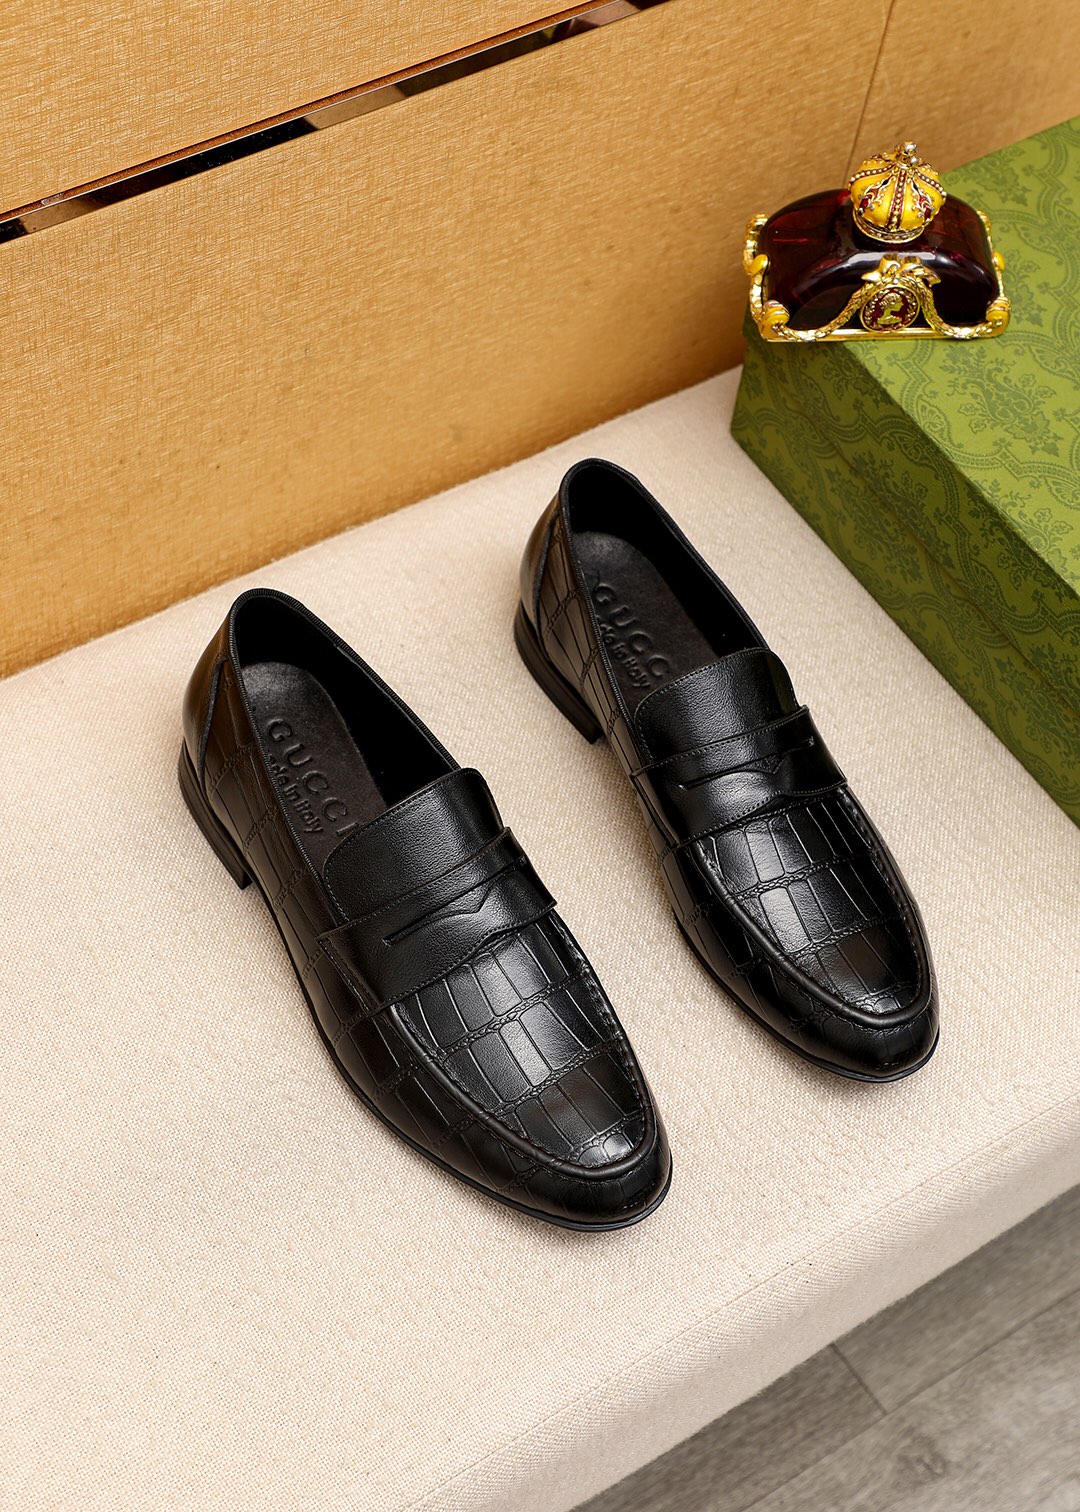 Product: Gucci "Gucci" casual leather shoes in regular sizes 38-44 (customized at 45️) Pro